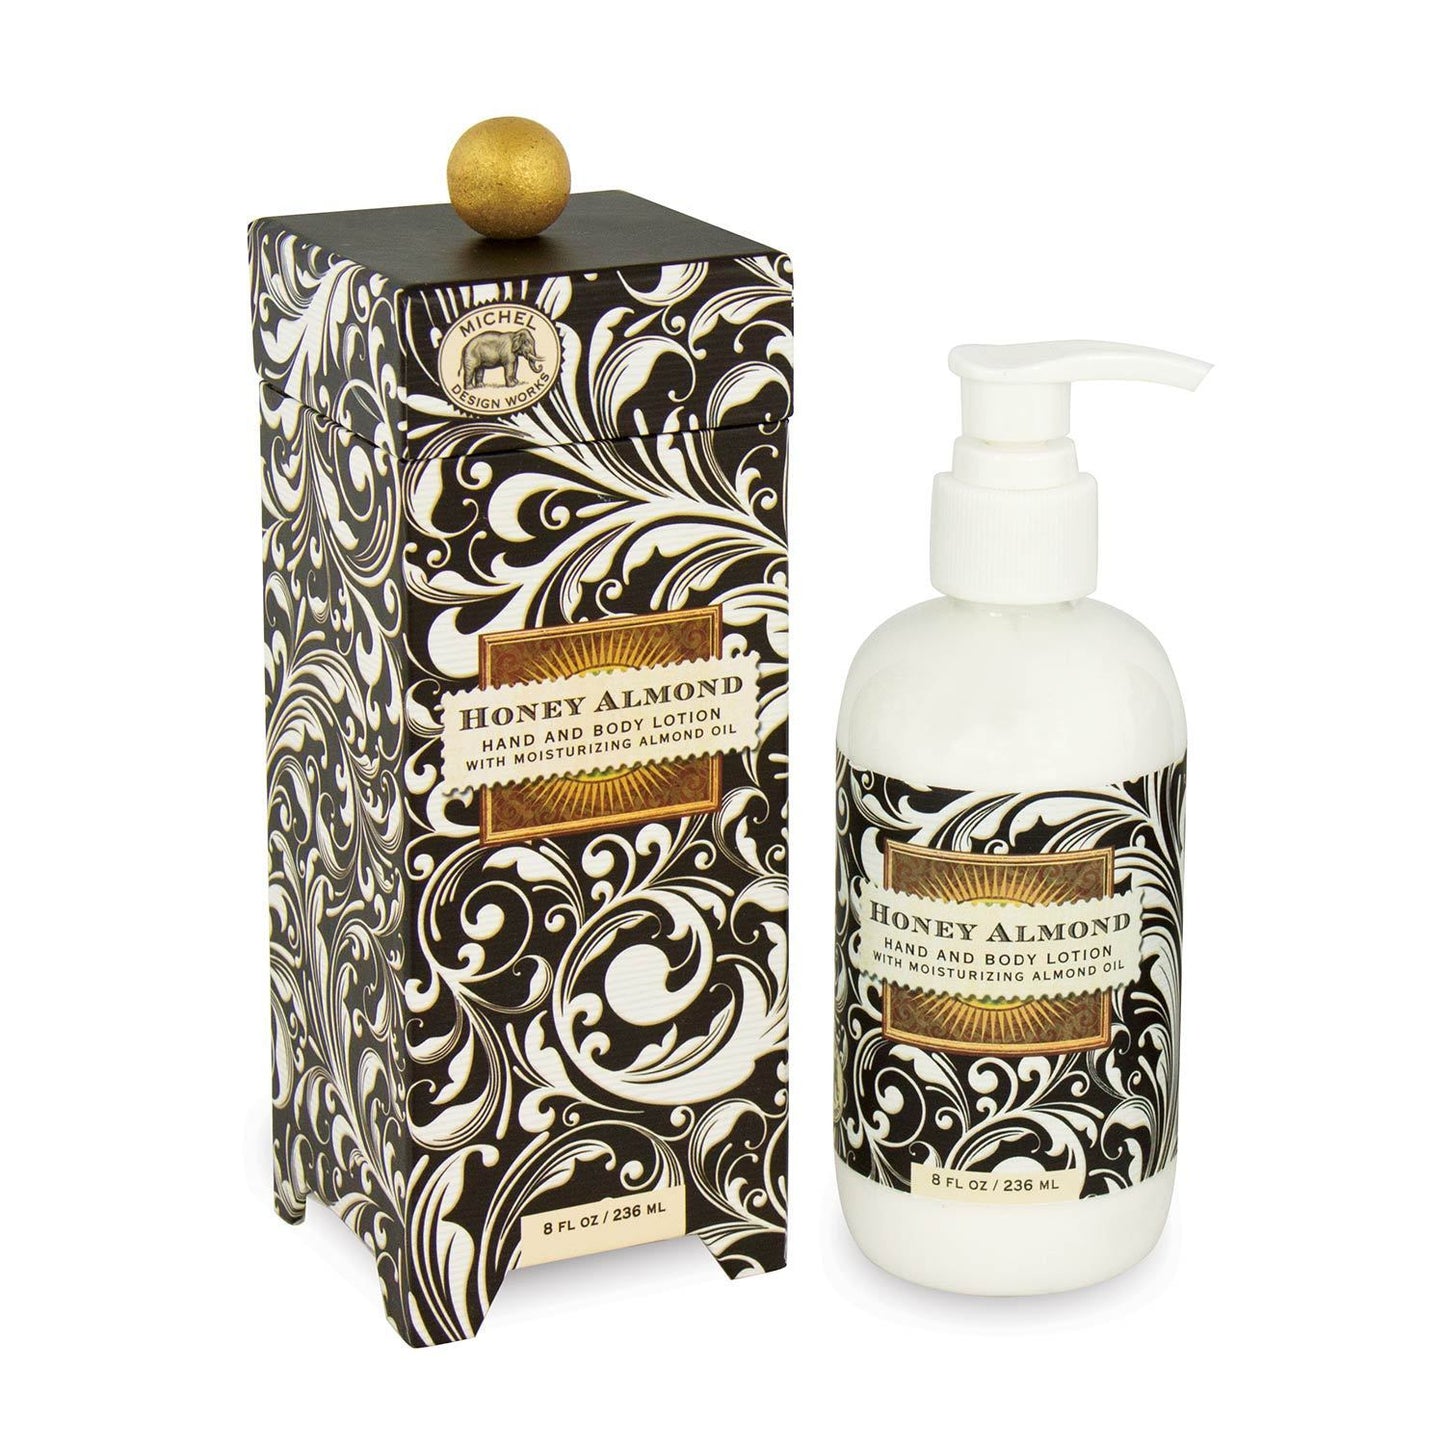 honey almond hand and body lotion